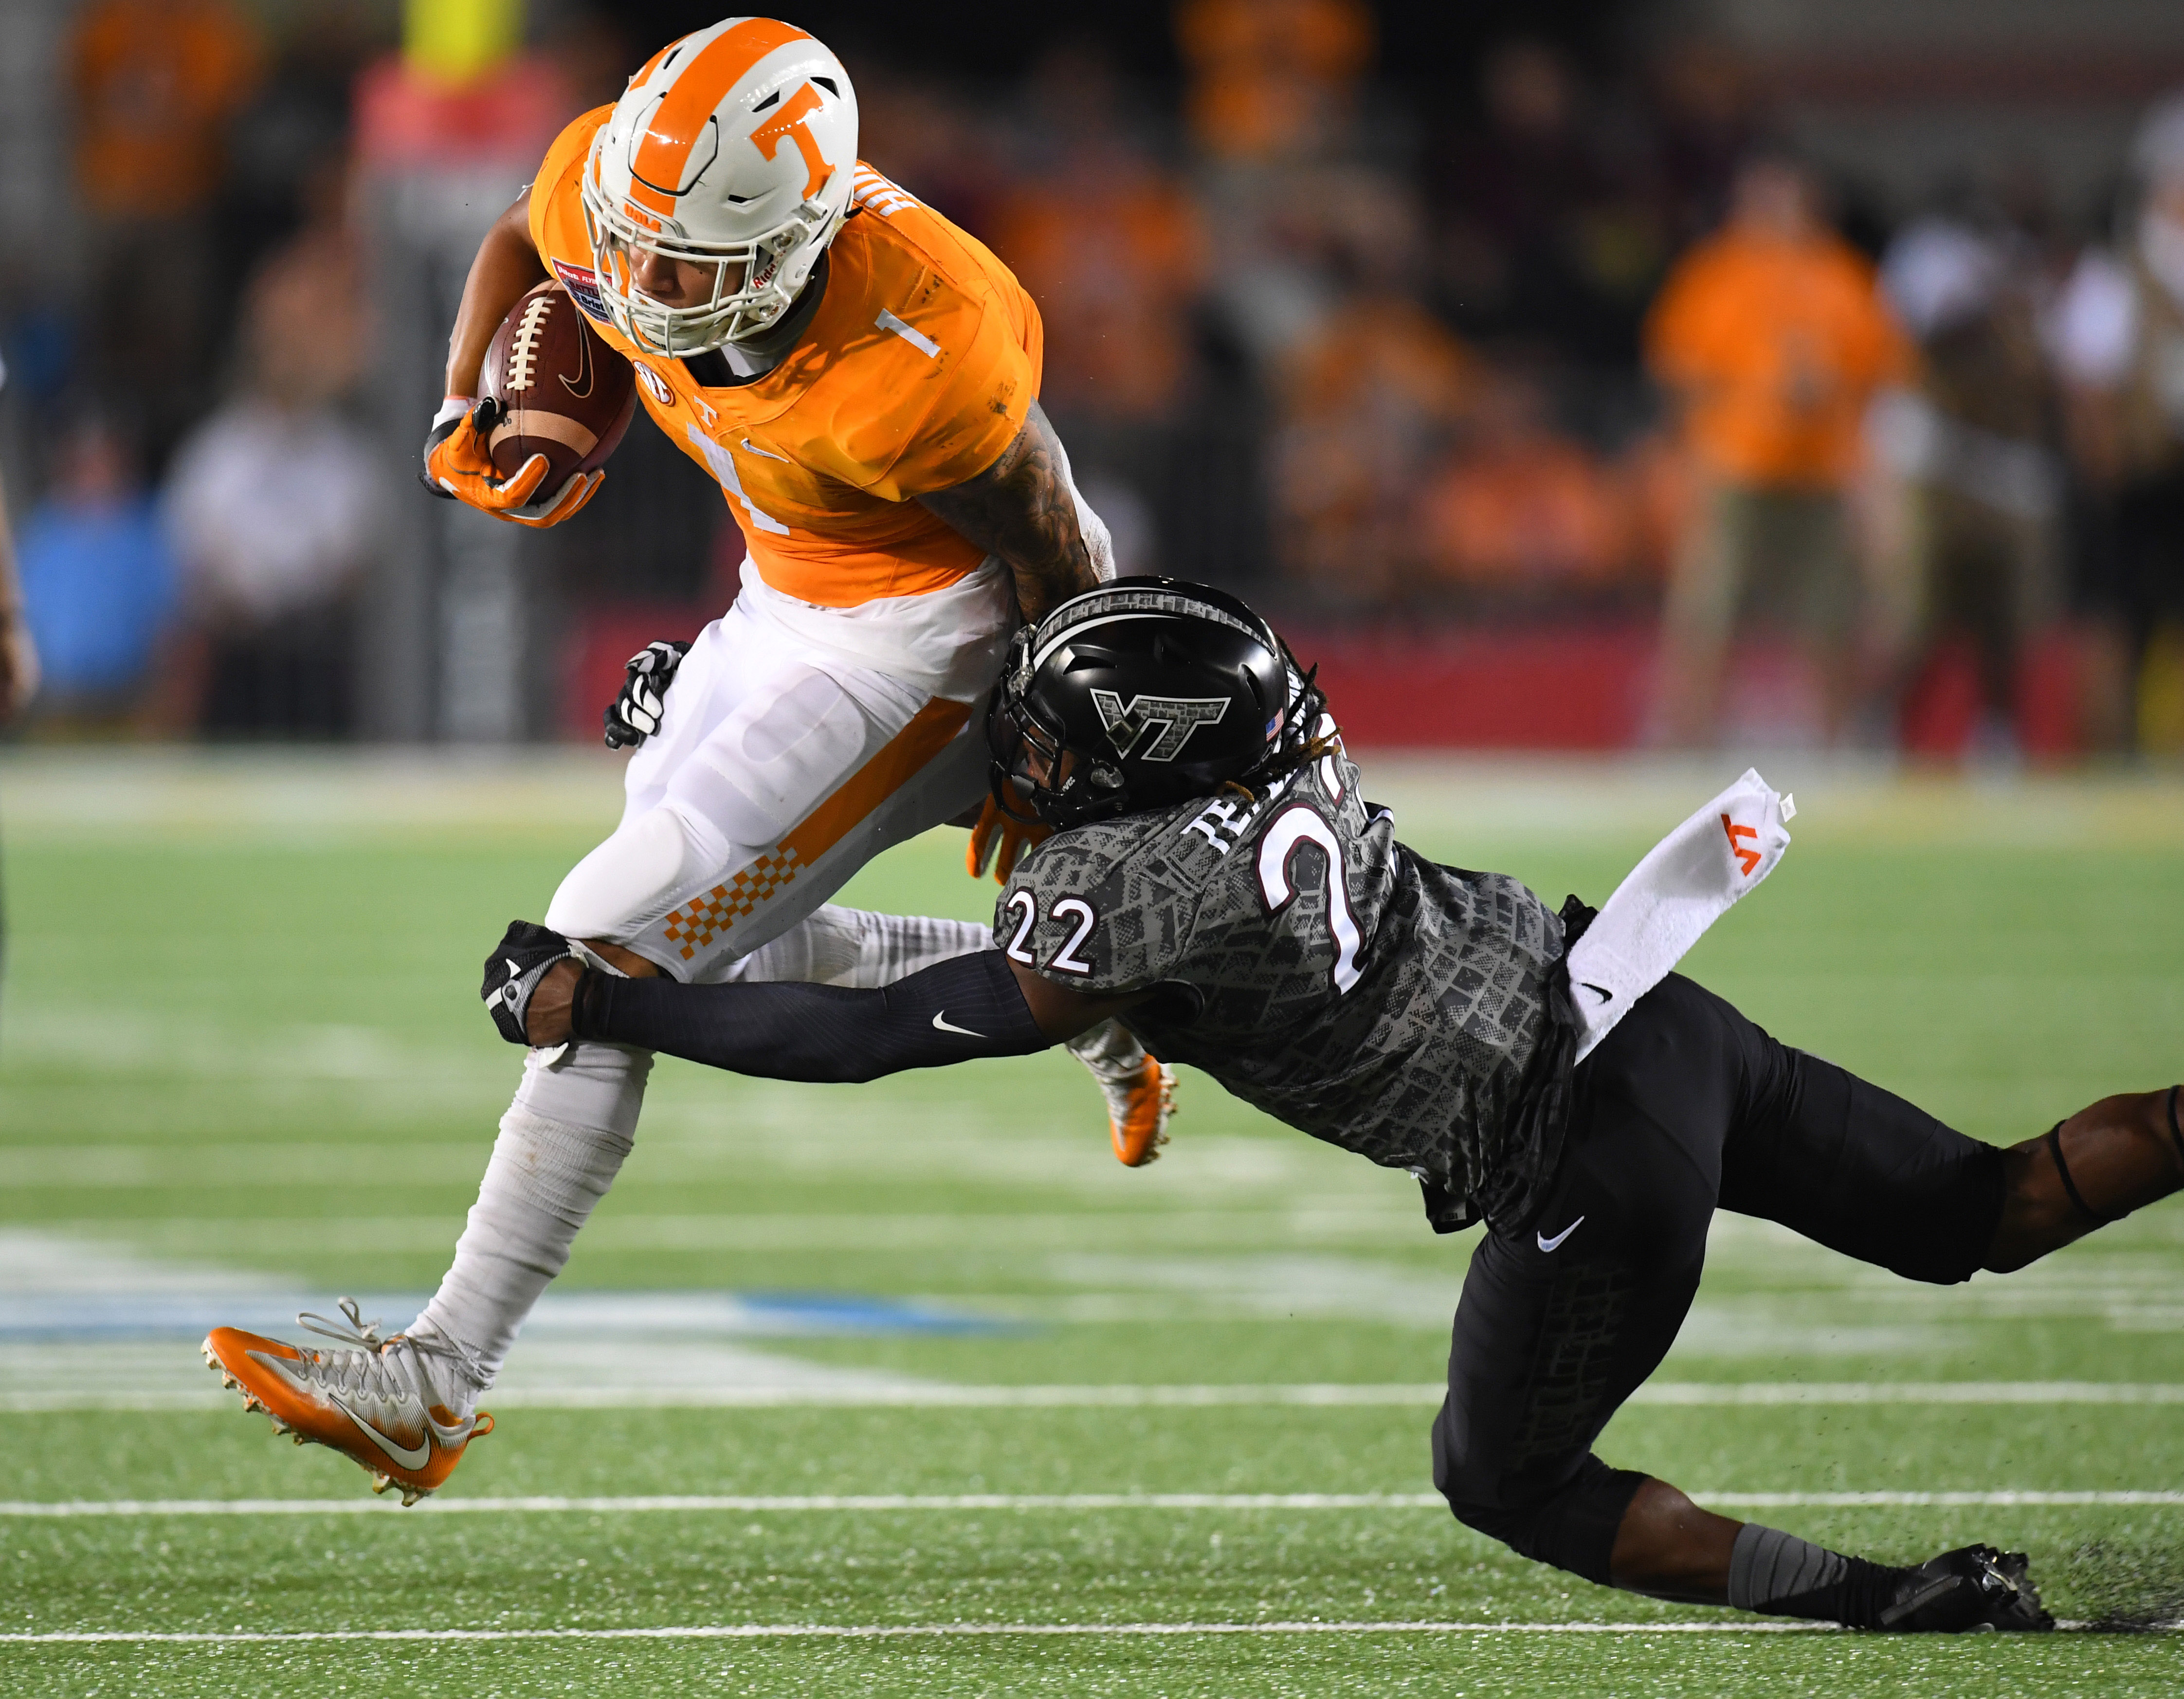 Sep 10, 2016; Bristol, TN, USA; Tennessee Volunteers running back Jalen Hurd (1) runs for a short gain while being tackled by Virginia Tech Hokies defensive back Terrell Edmunds (22) during the first half at Bristol Motor Speedway. Mandatory Credit: Christopher Hanewinckel-USA TODAY Sports